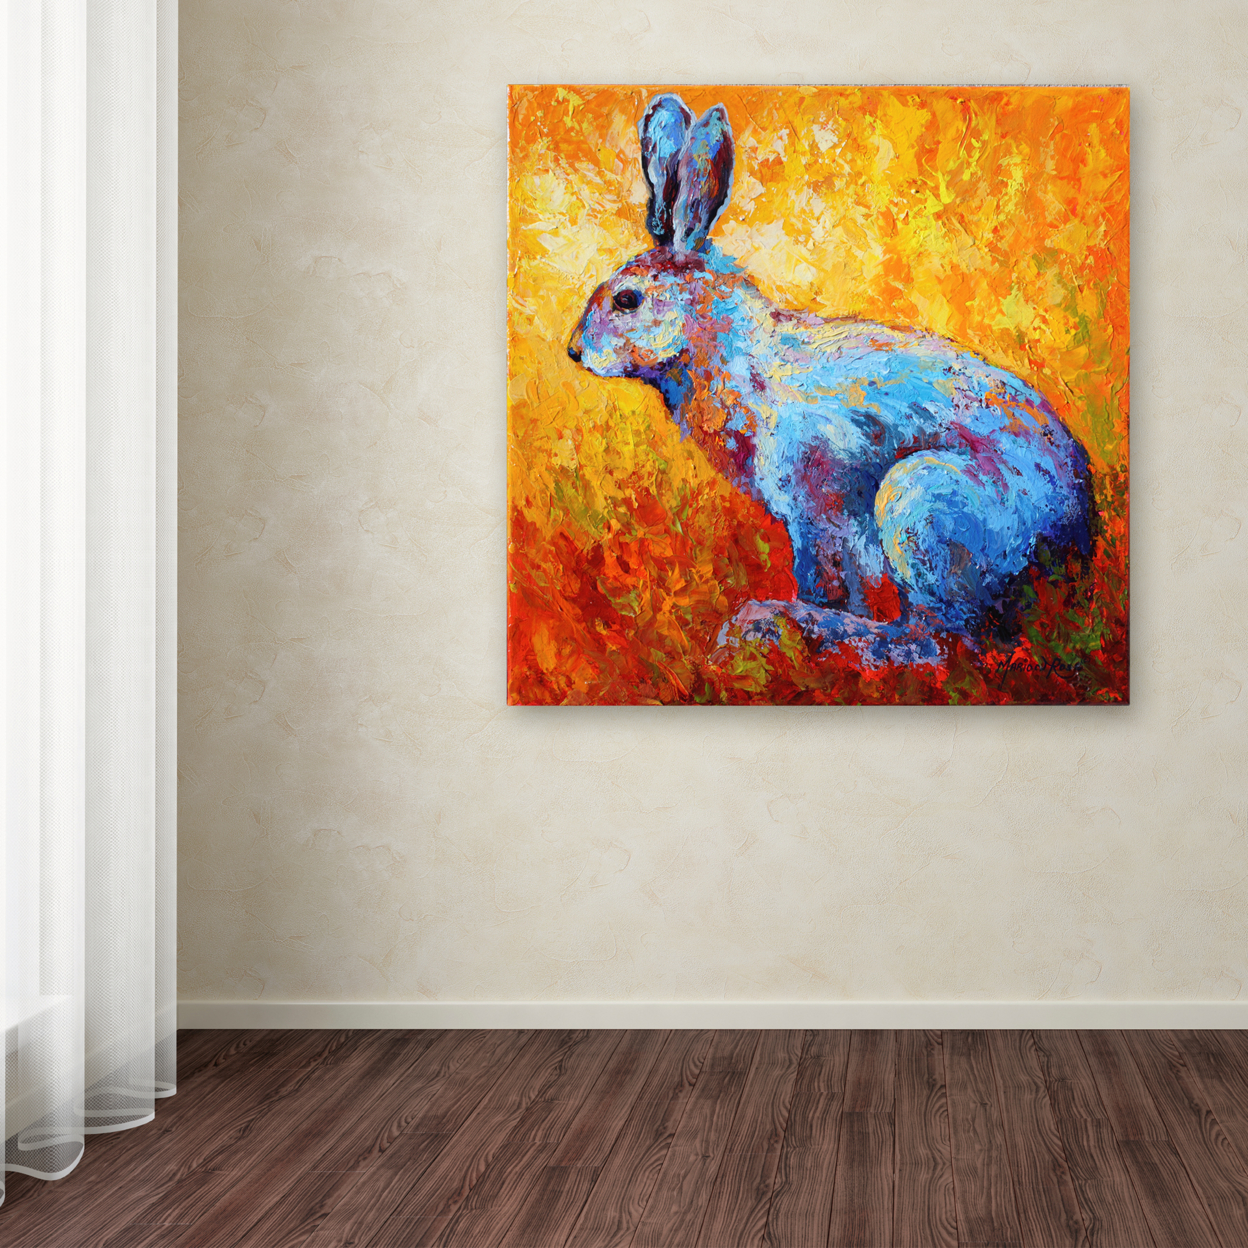 Marion Rose 'Bunnie (krabbit)' Ready To Hang Canvas Art 24 X 24 Inches Made In USA